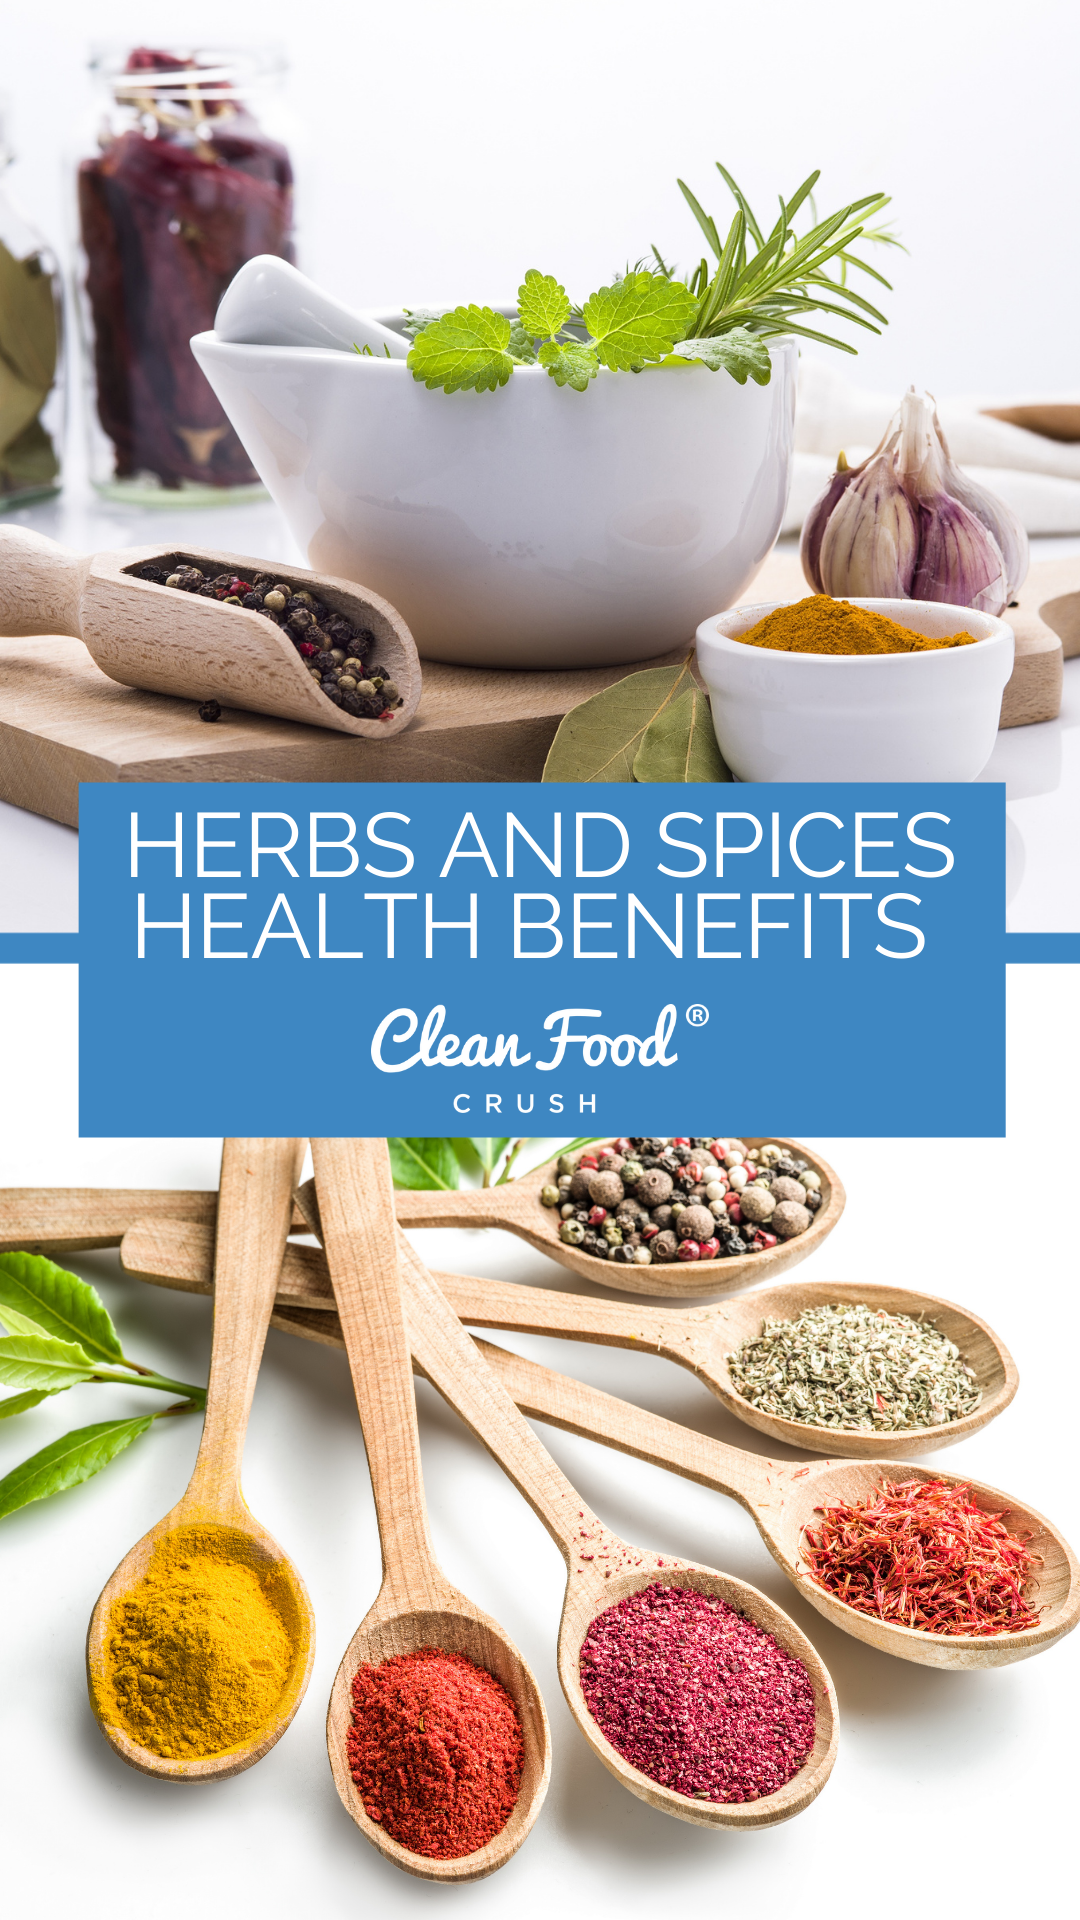 What Are The Benefits Of Cooking With Herbs And Spices?